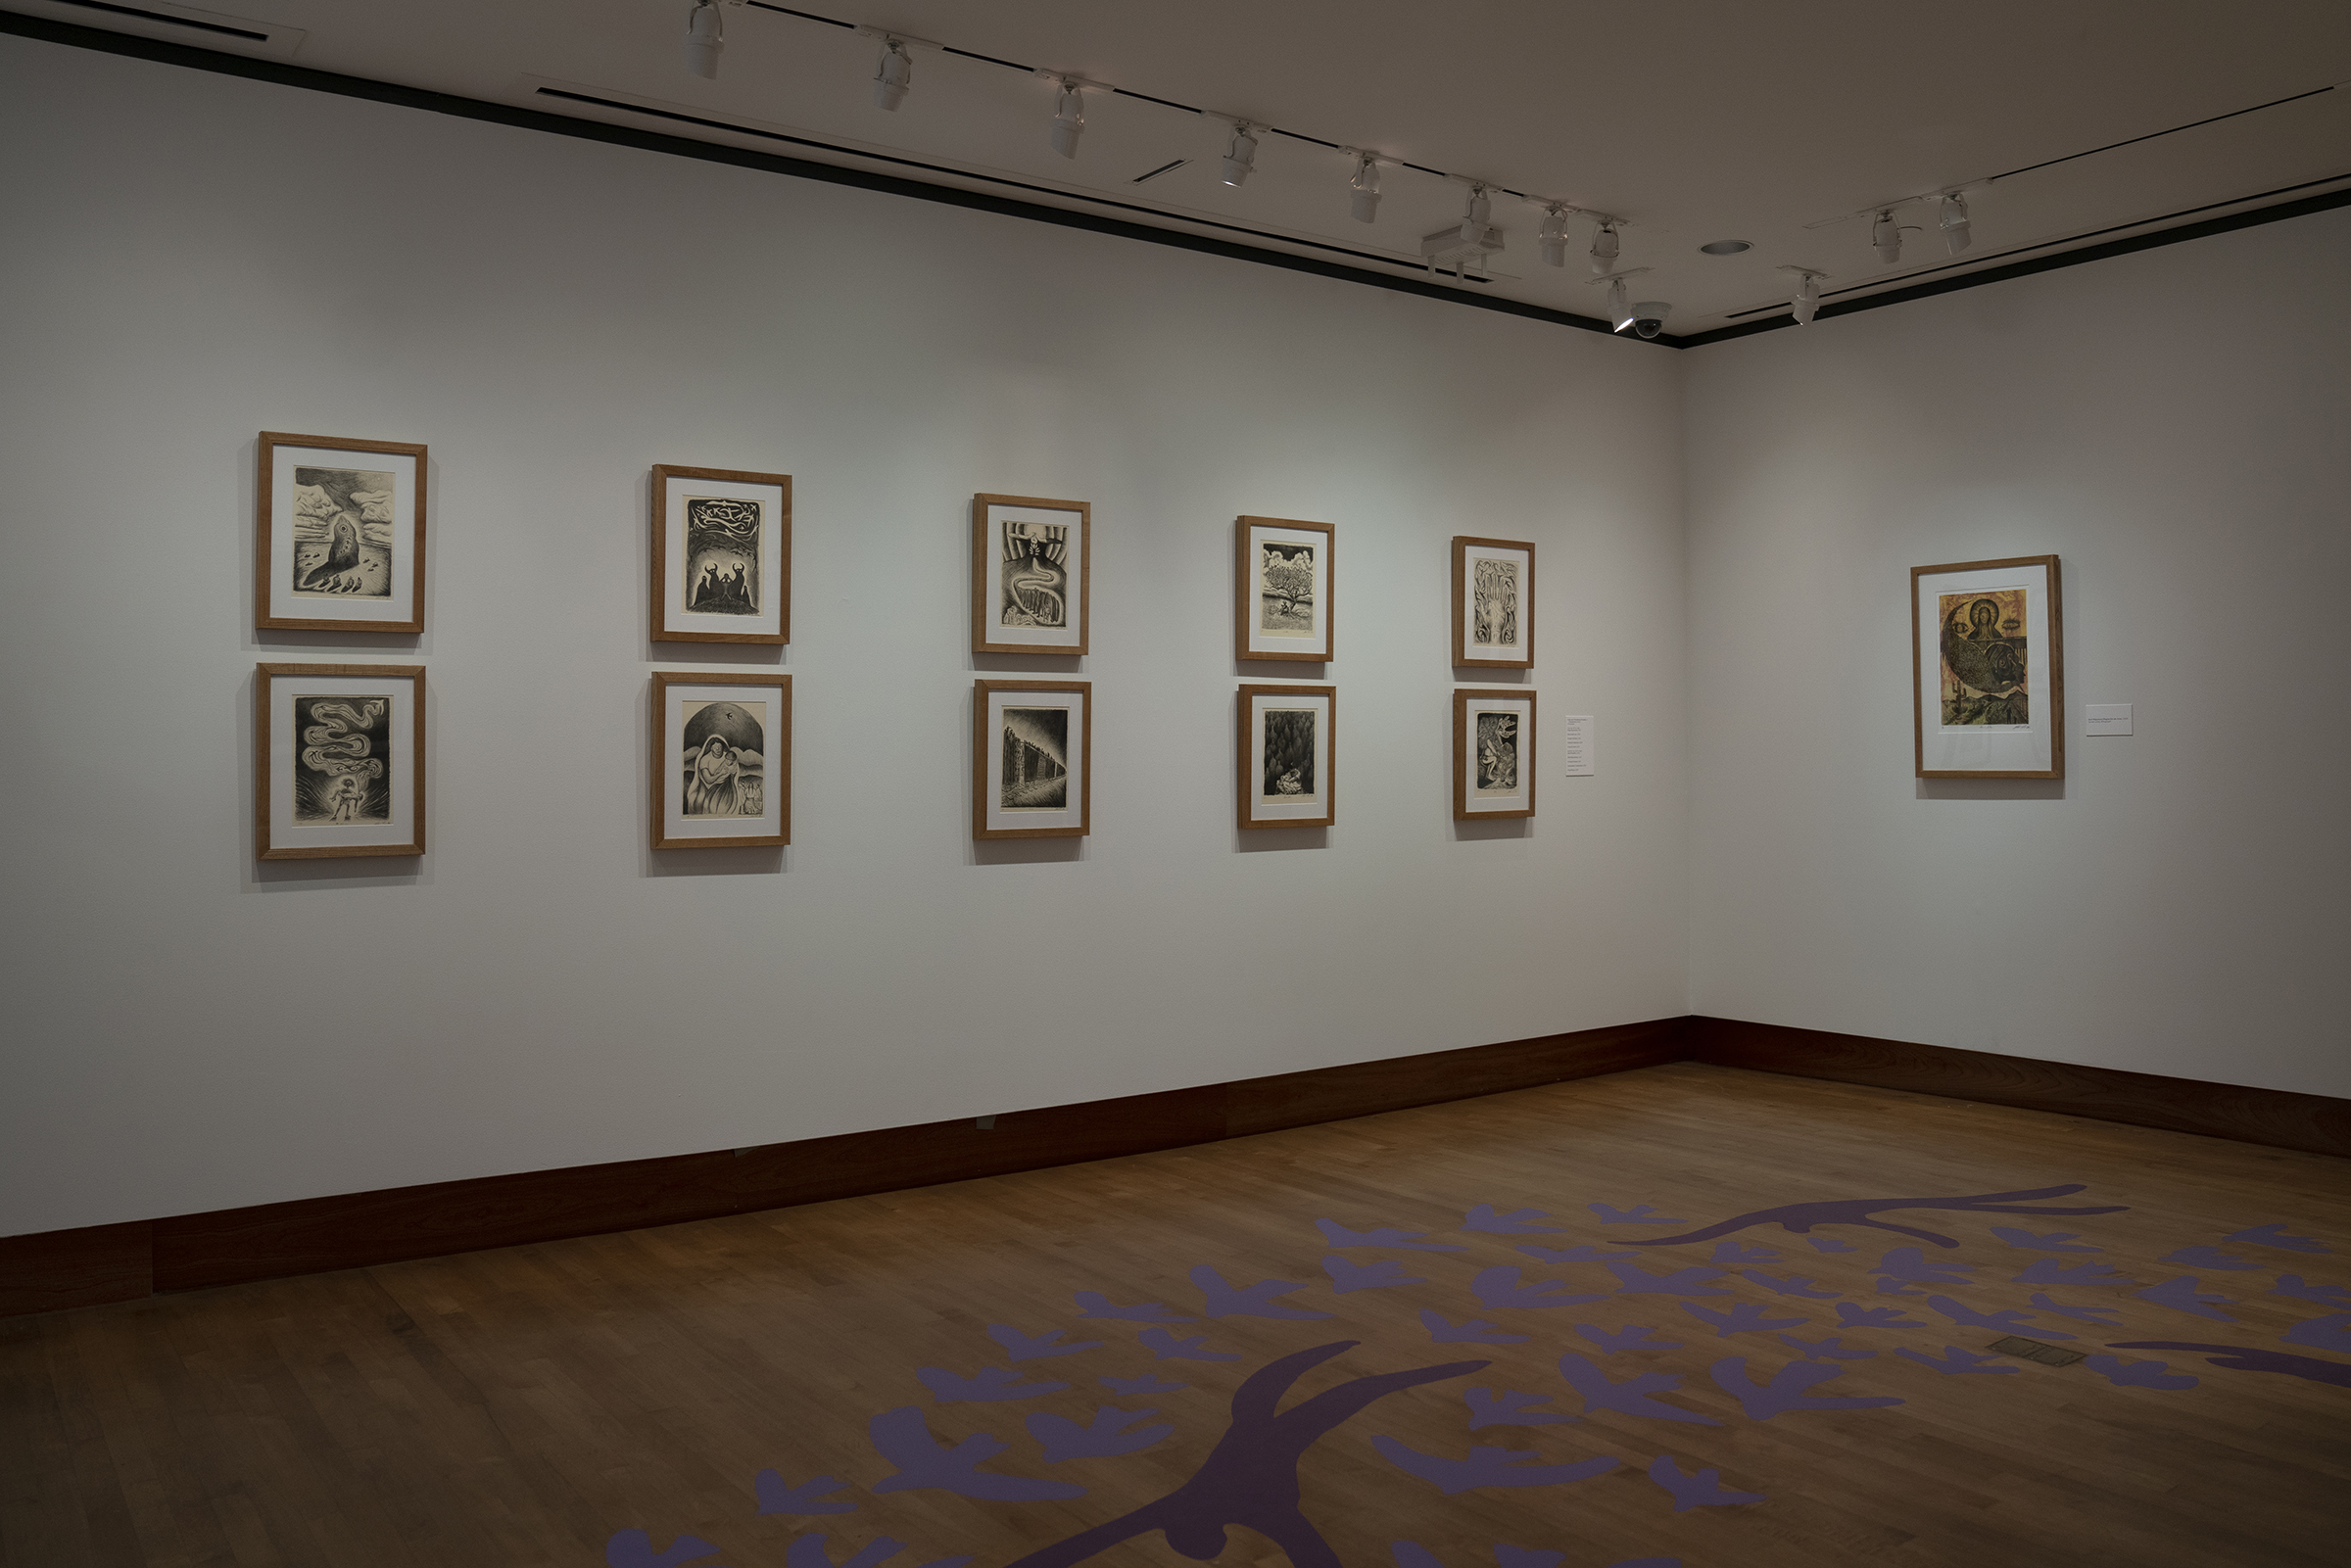 Installation view of Untethered: Our Journey Beyond Borders by Roberto Torres Mata at the Chazen Museum of Art, University of Wisconsin-Madison.